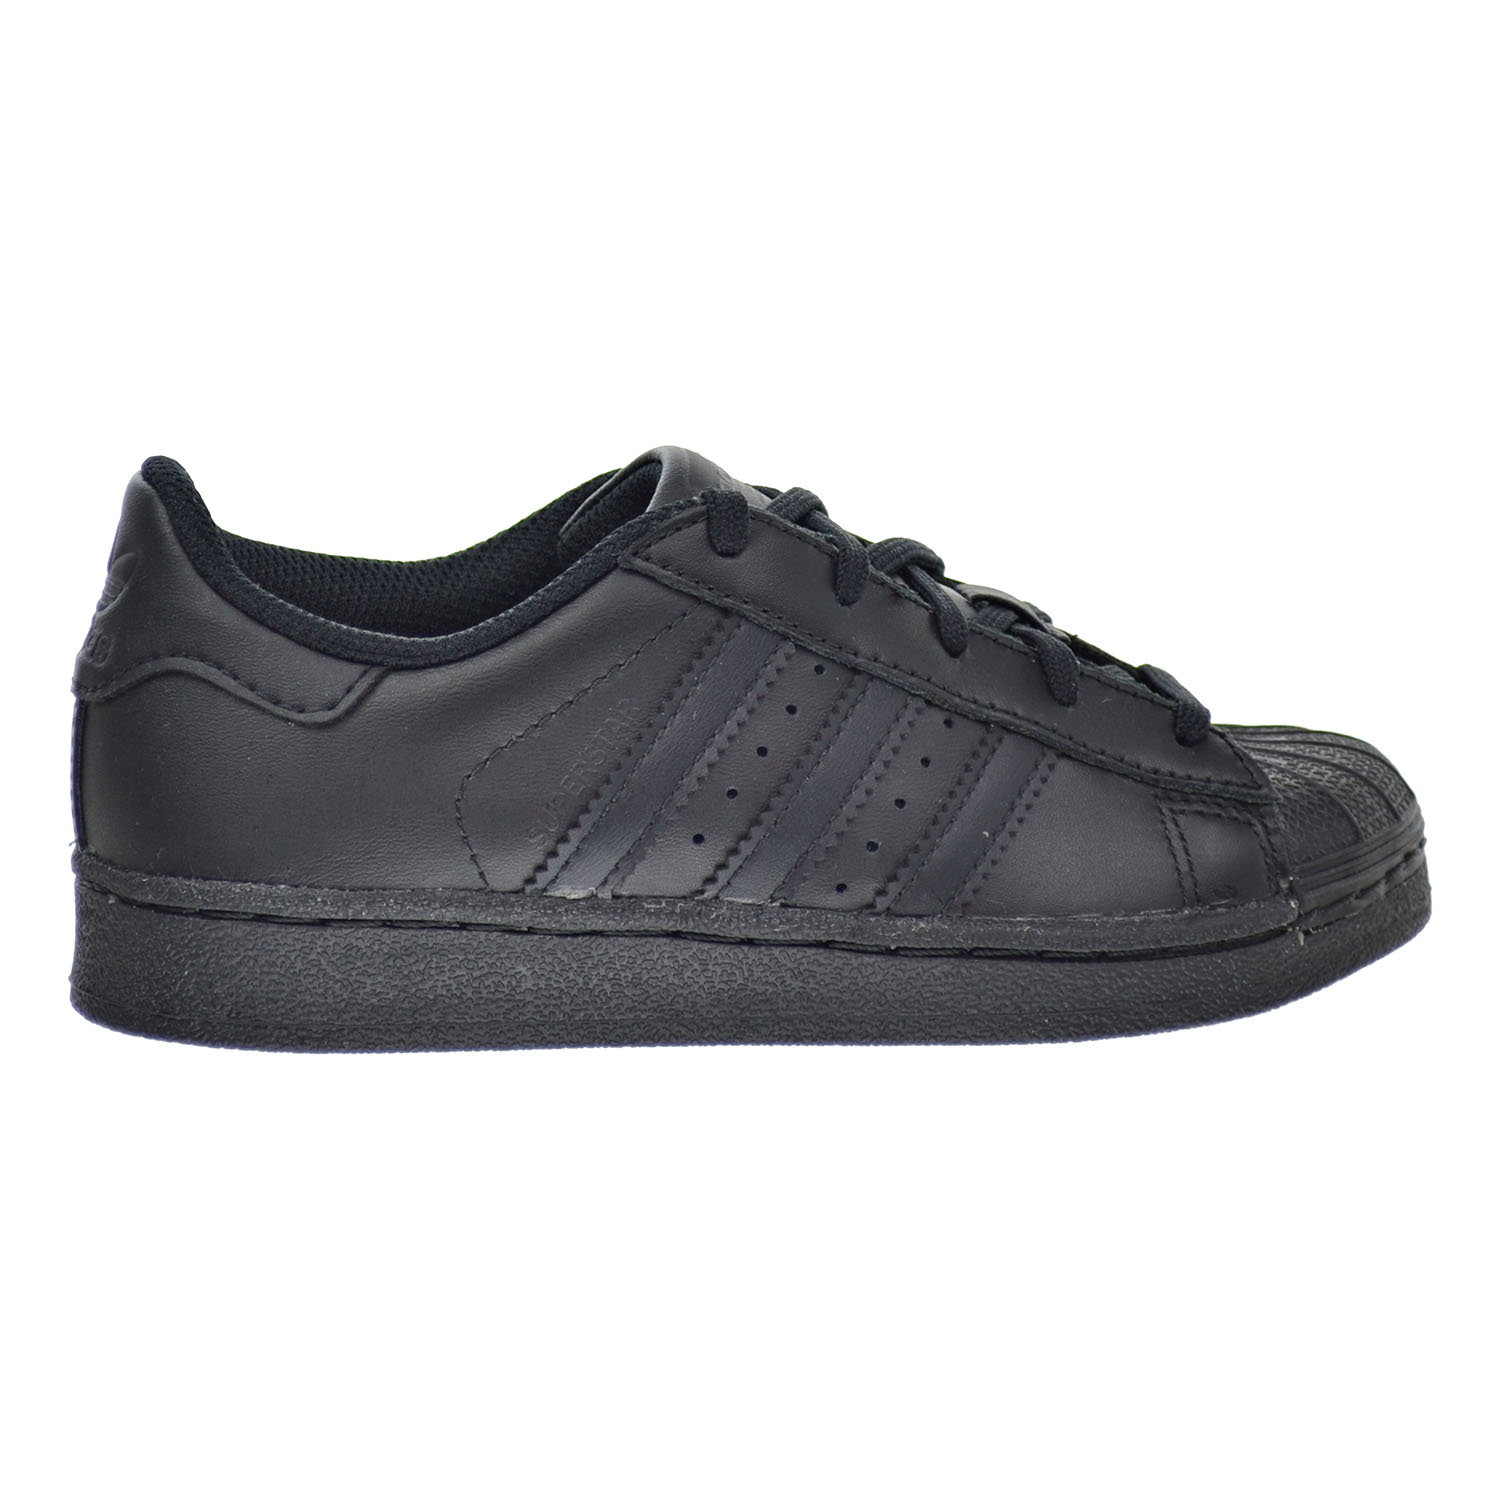 superstar foundation all black style shoes